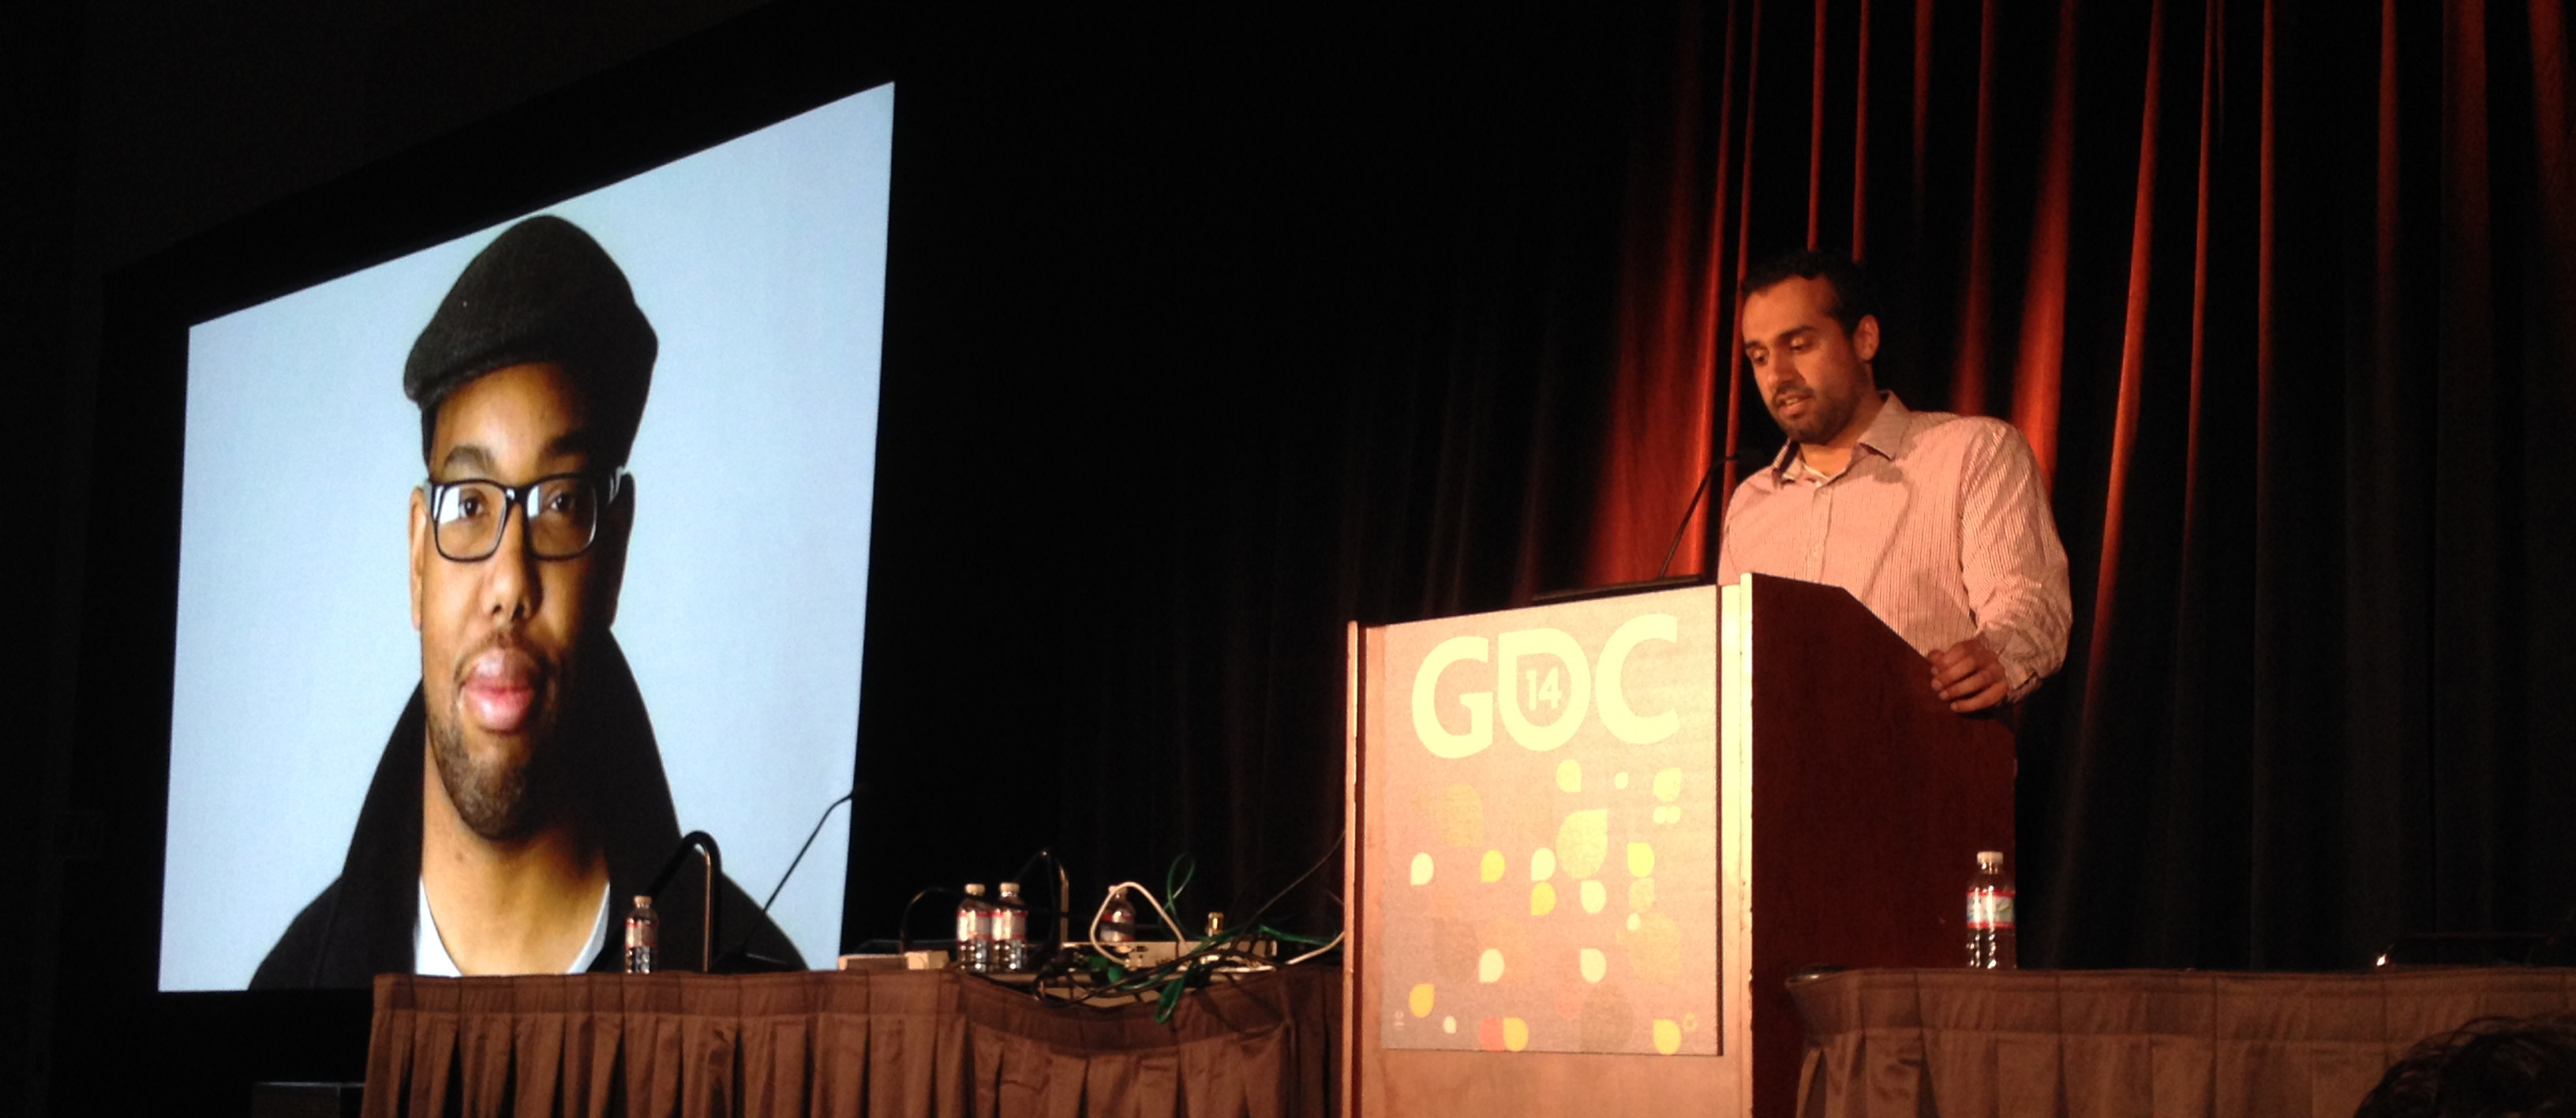 Manveer Heir standing at the podium while he delivers his GDC 2014 panel.